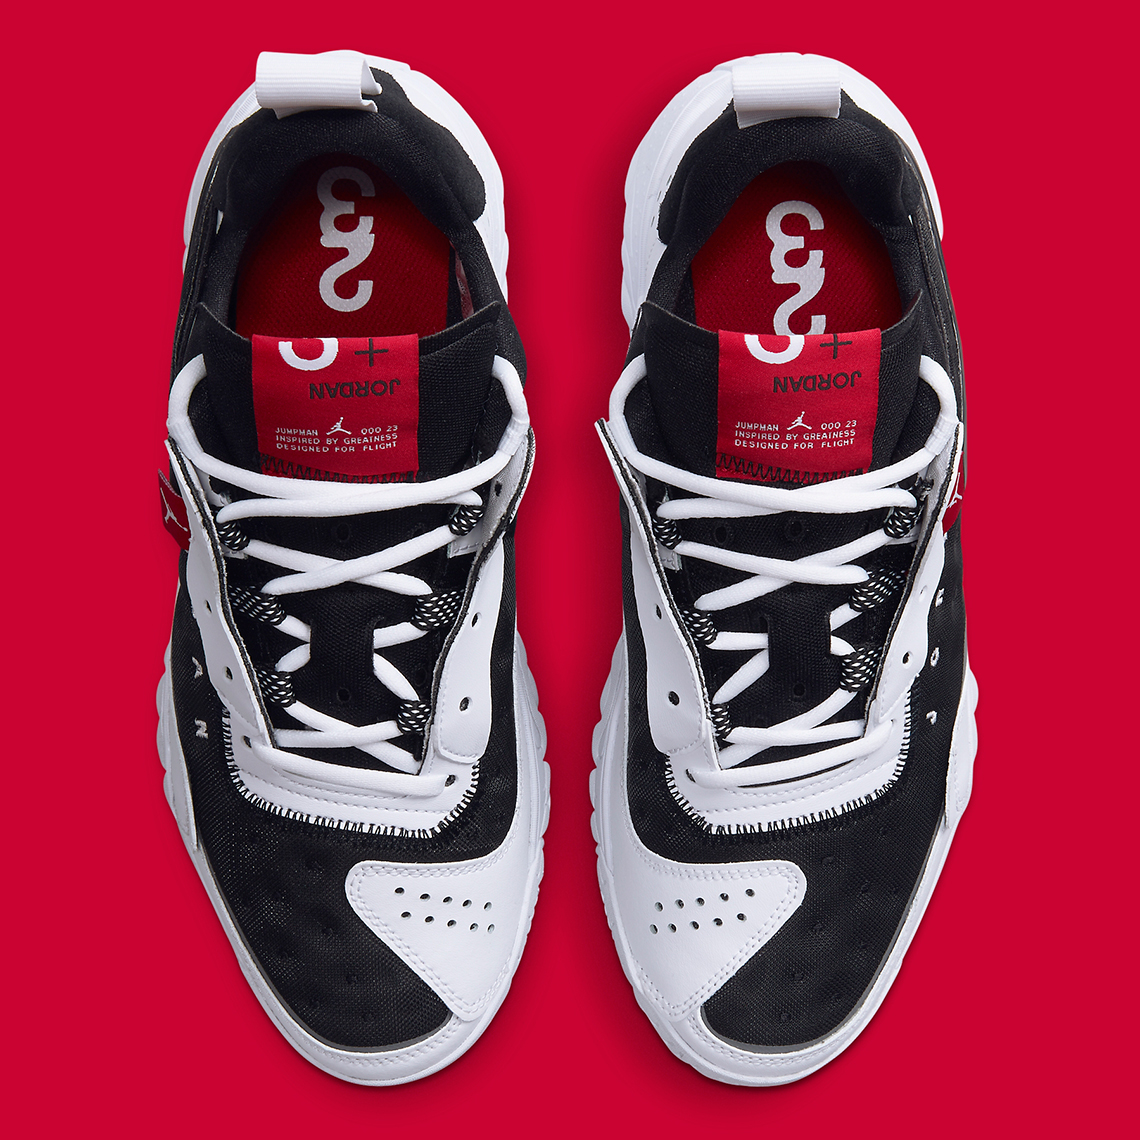 FitminShops - Enjoy official images of the Jordan Delta 2 as you prepare  for the pairs arrival at - Air Jordan 1 High Strap Lakers Retro 'Red Oreo